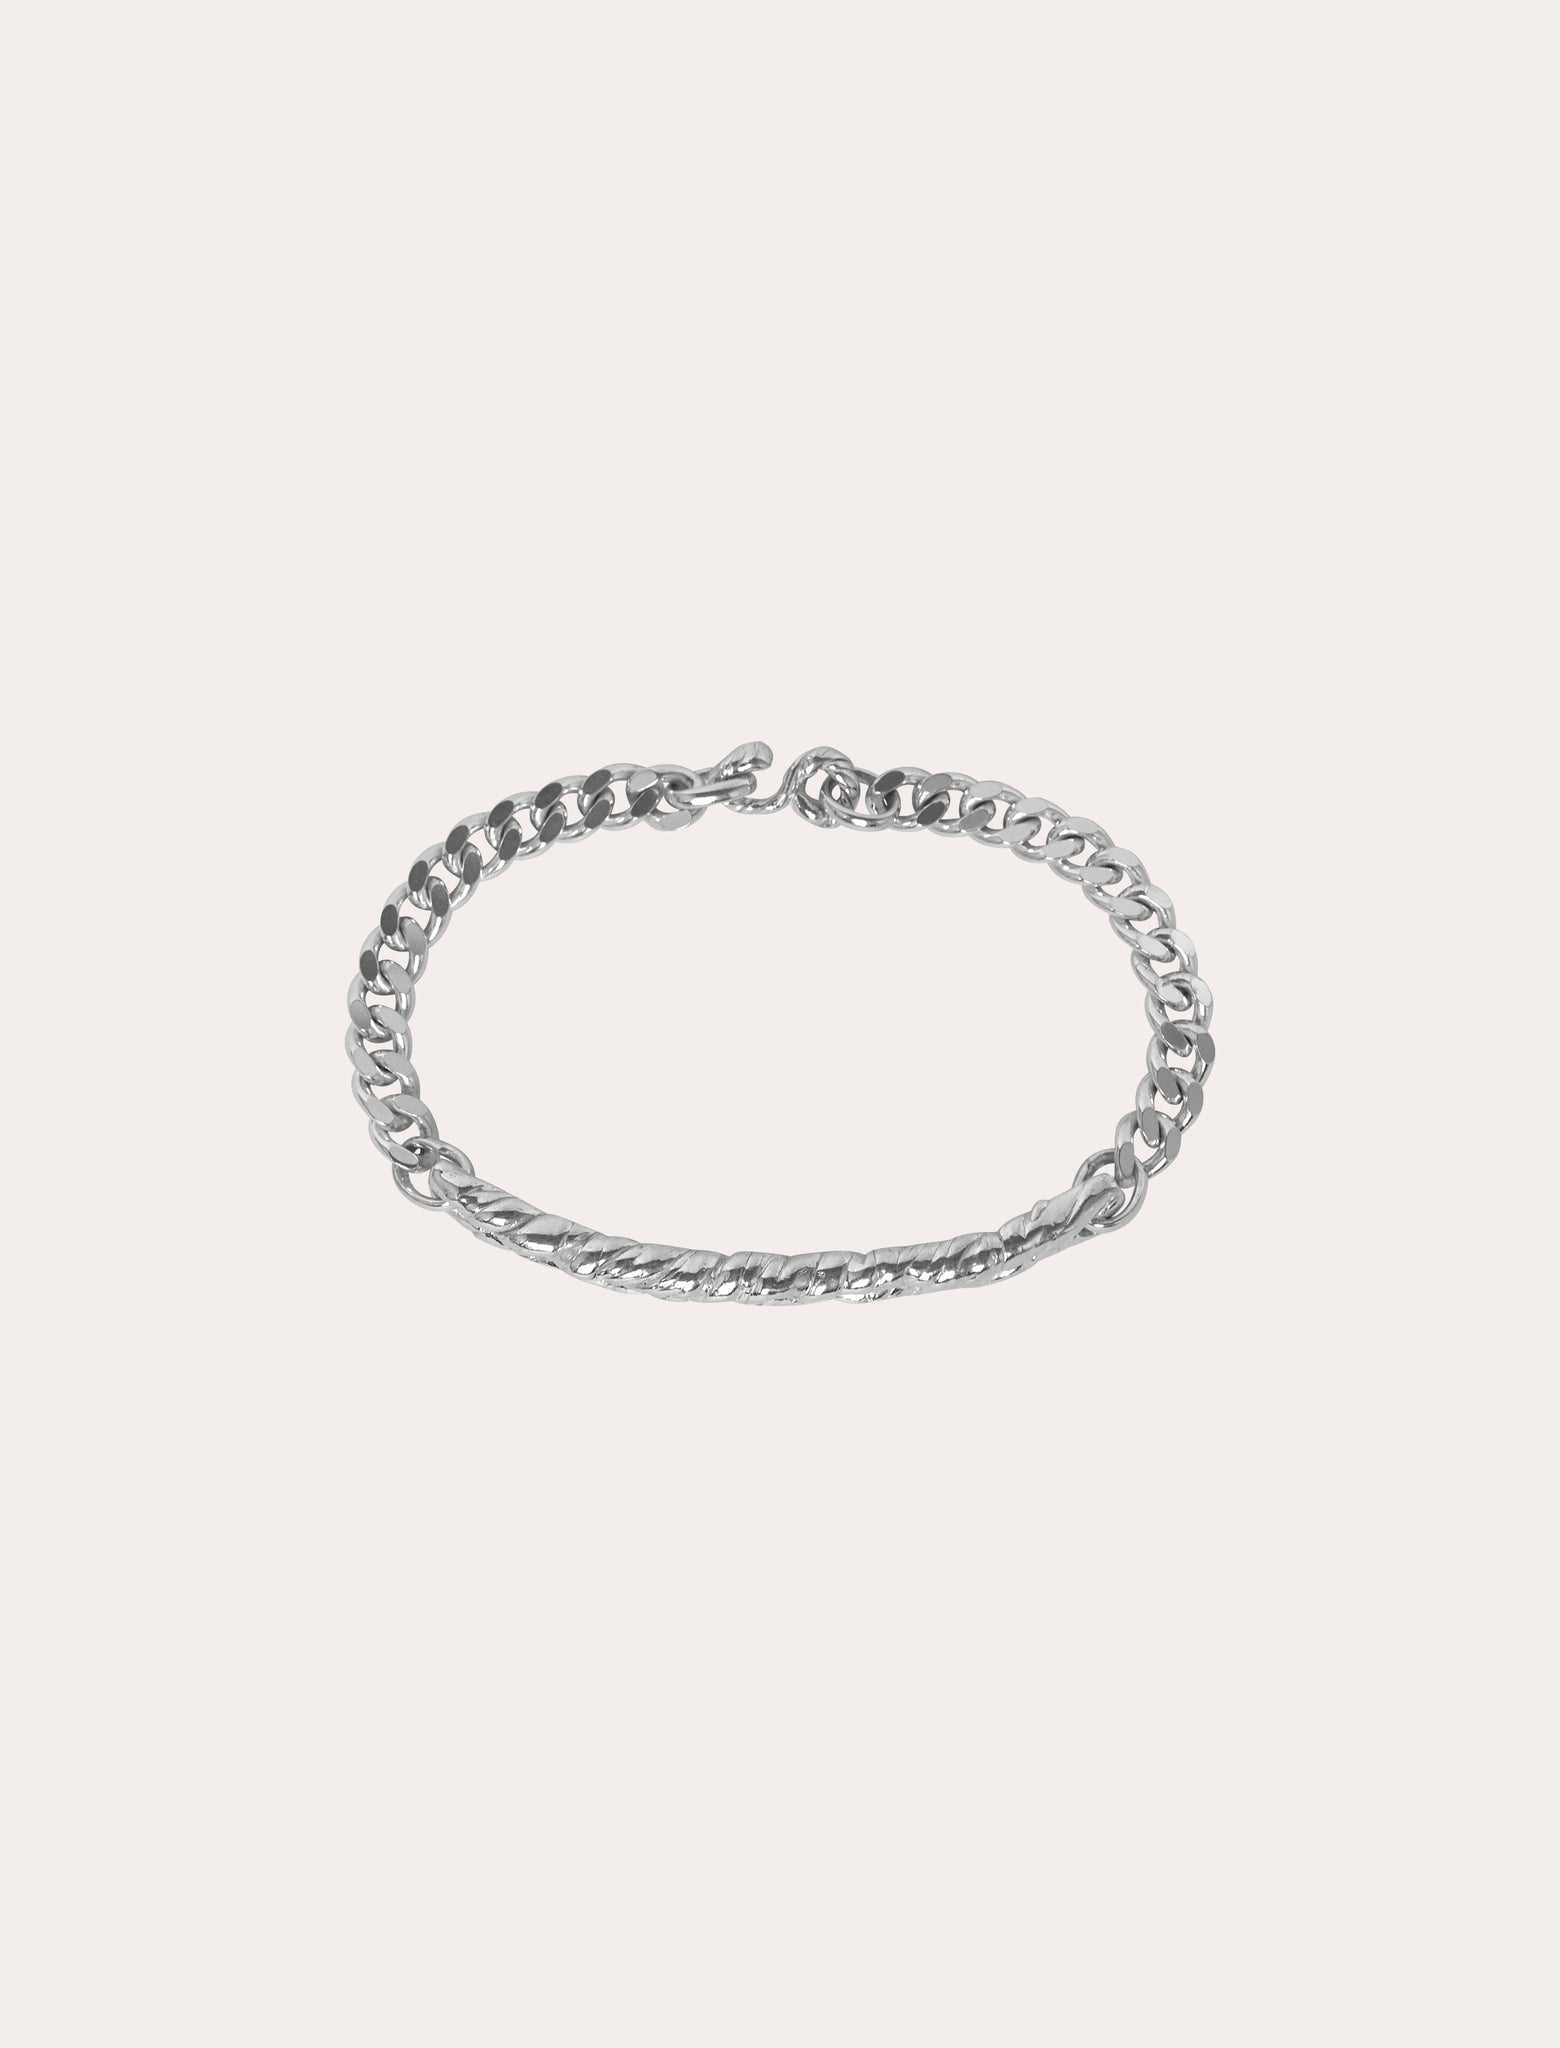 ANOTHER ASPECT x Corali, Kusari Bracelet Sterling Silver